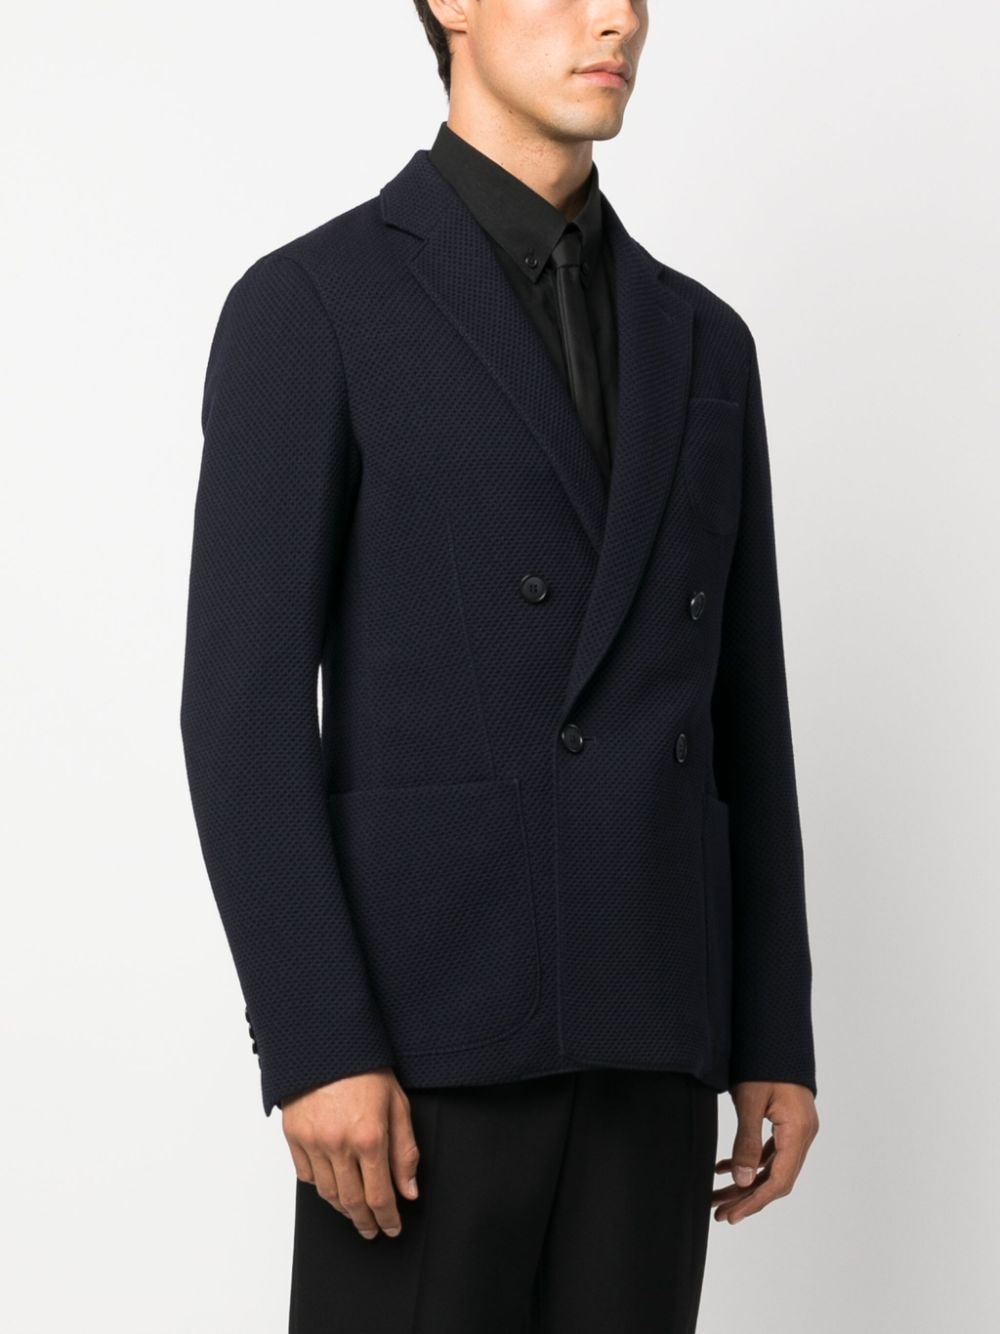 GIORGIO ARMANI Navy Blue Wool Double-Breasted Blazer for Men